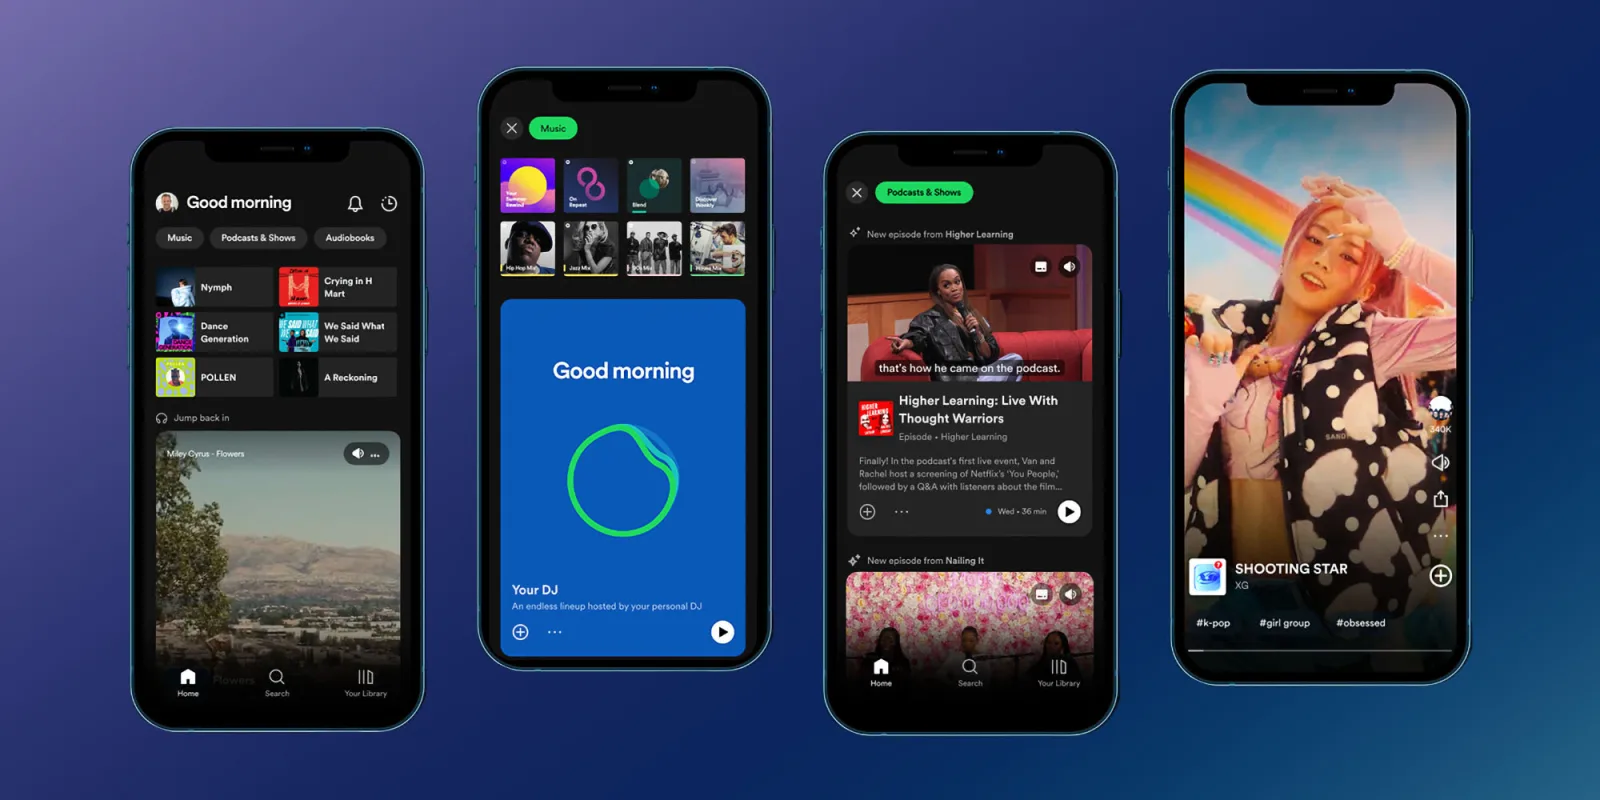 Spotify Is Launching Its "Greatest Evolution to Date" with A New Home Feed Modelled after TikTok for iOS and Android.